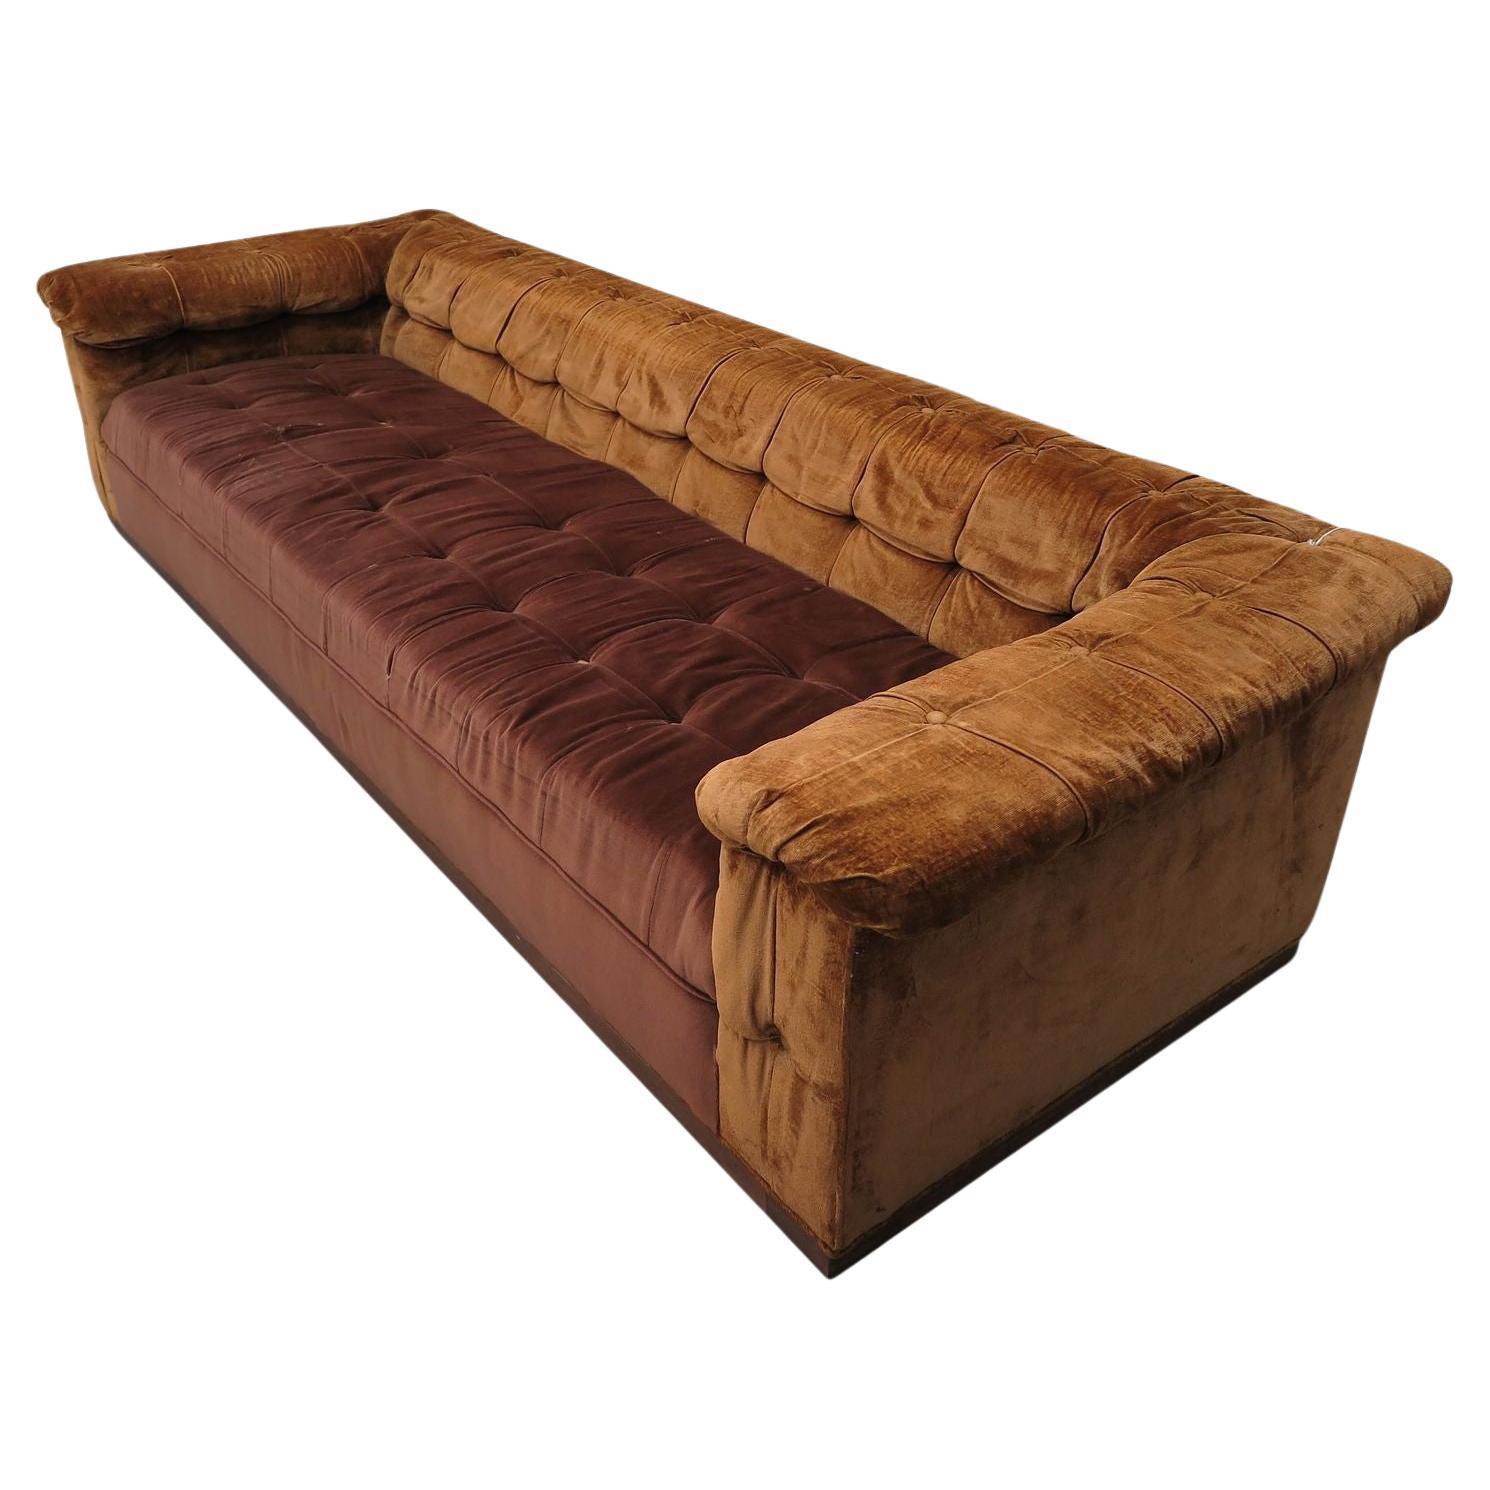 Edward Wormley for Dunbar, The Party Sofa, Model 5407, for Reupholstery. For Sale